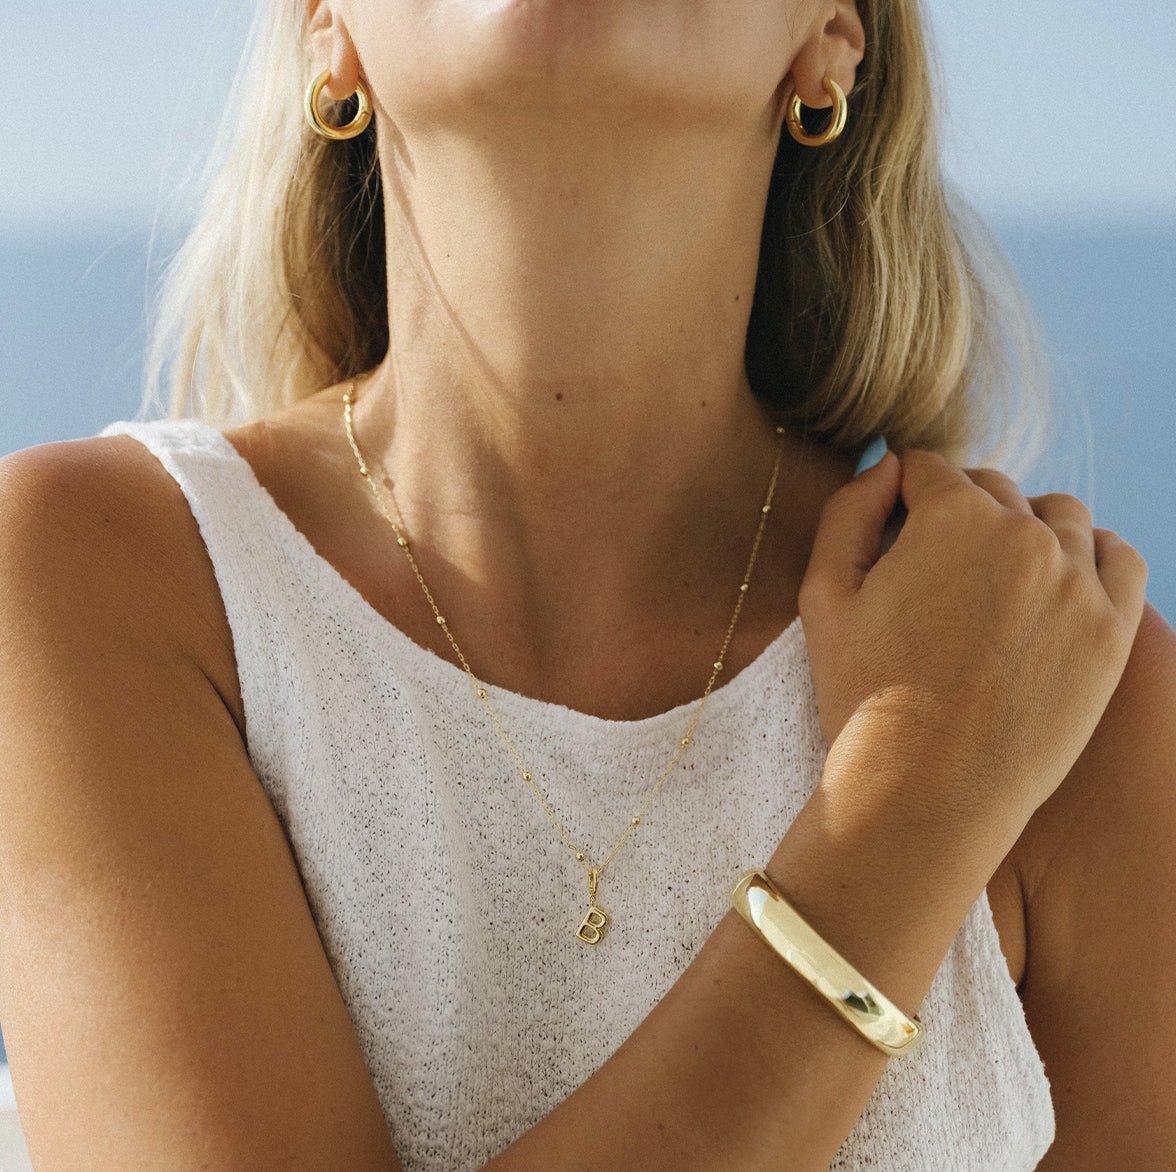 @barbarabrigido wearing gold plated necklaces and bracelets